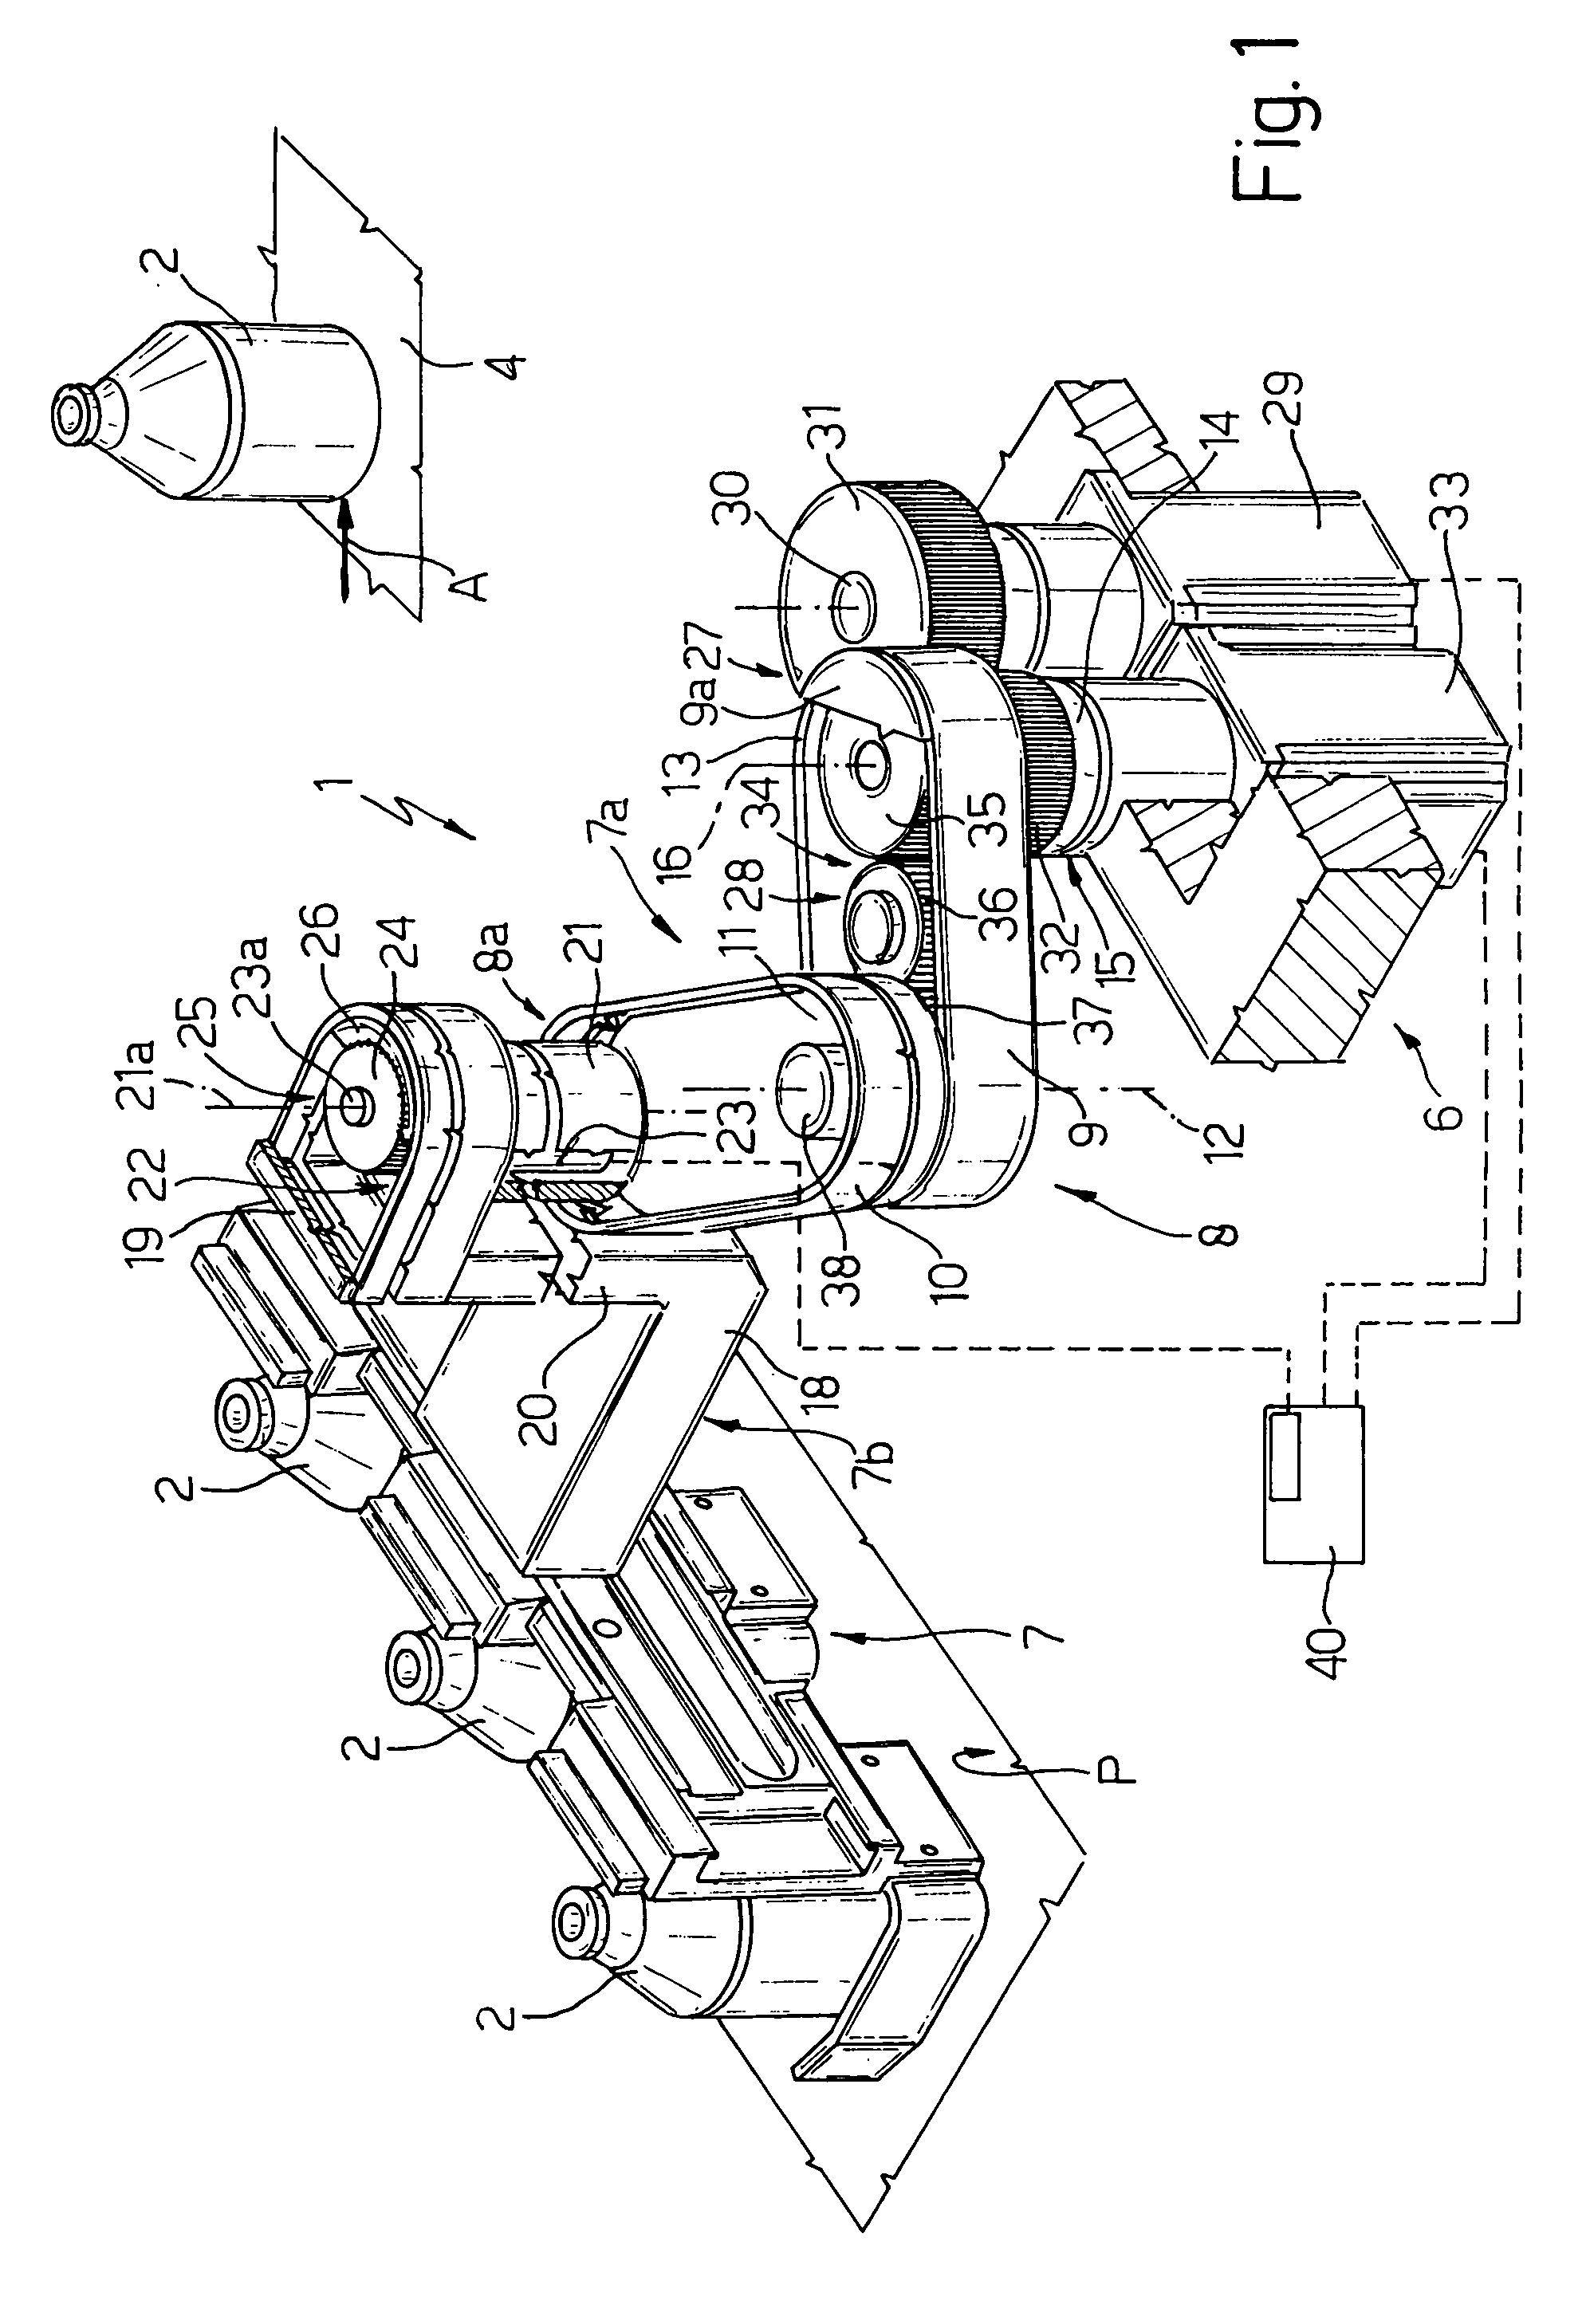 Transfer unit for transferring glass articles